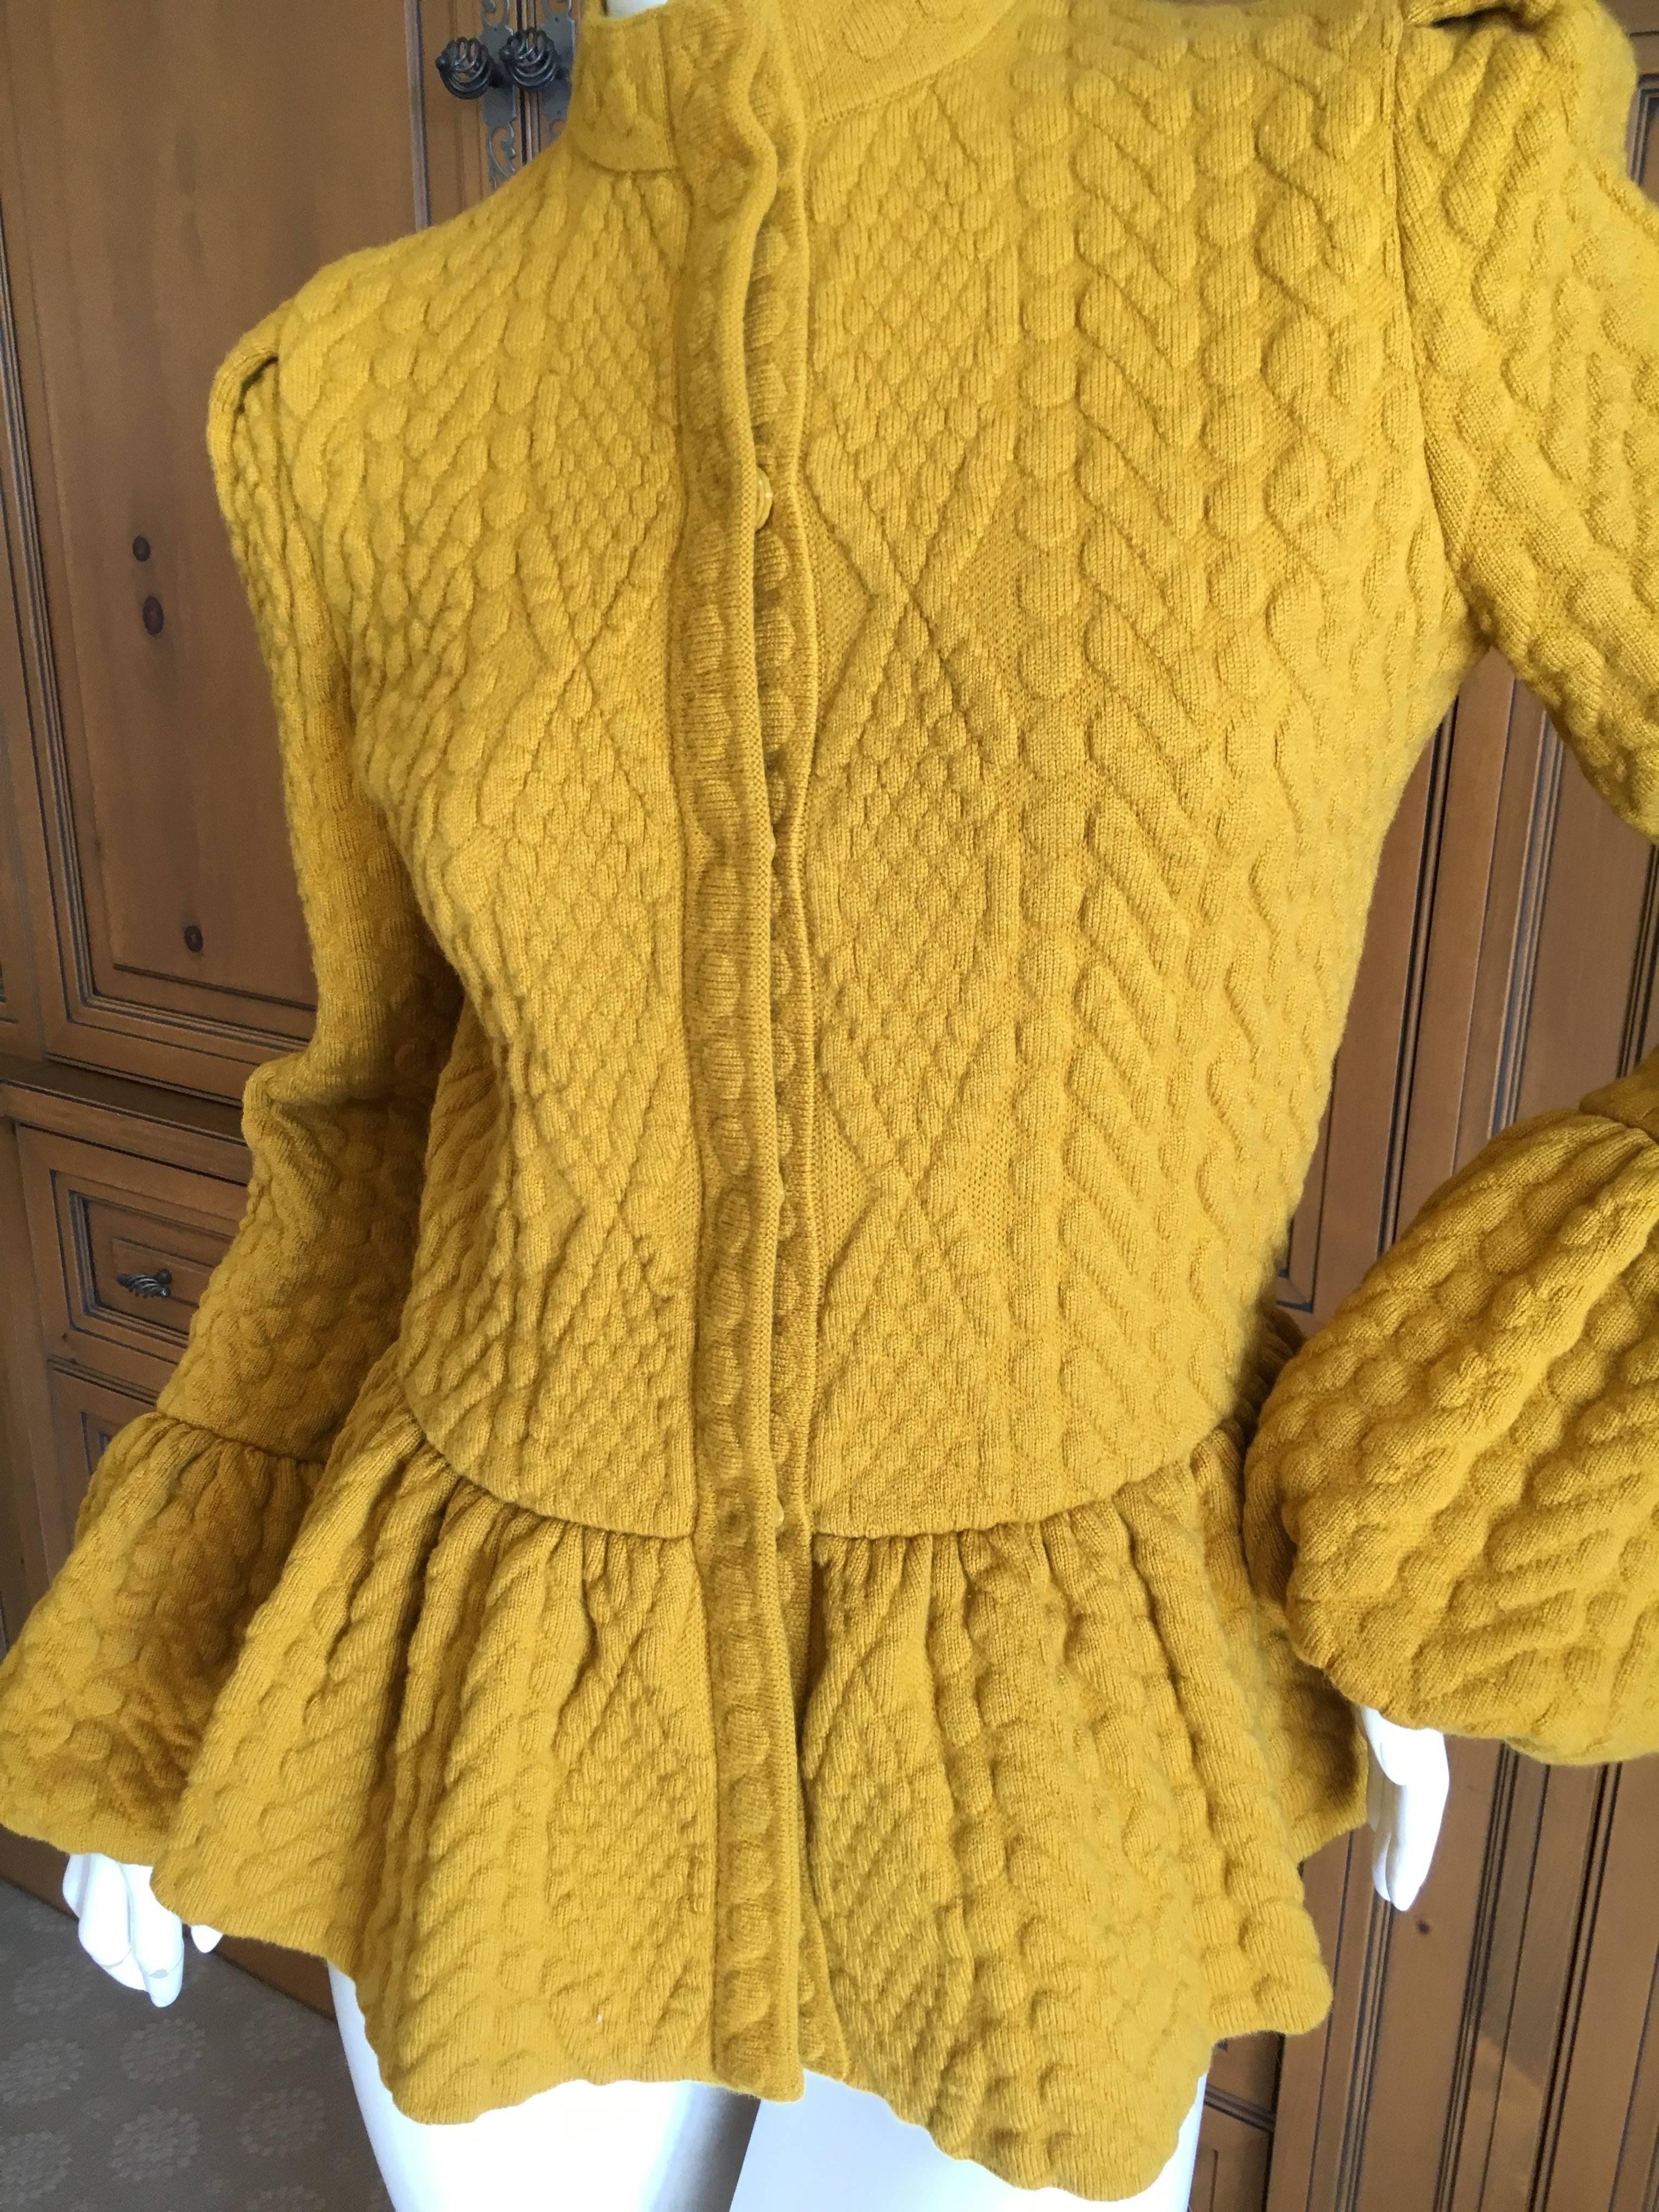 Alexander McQueen Mustard Color Bell Sleeve Cable Knit Sweater Jacket.
Size 38
Bust 38'
Waist 30"
Length 25"
Excellent conditon